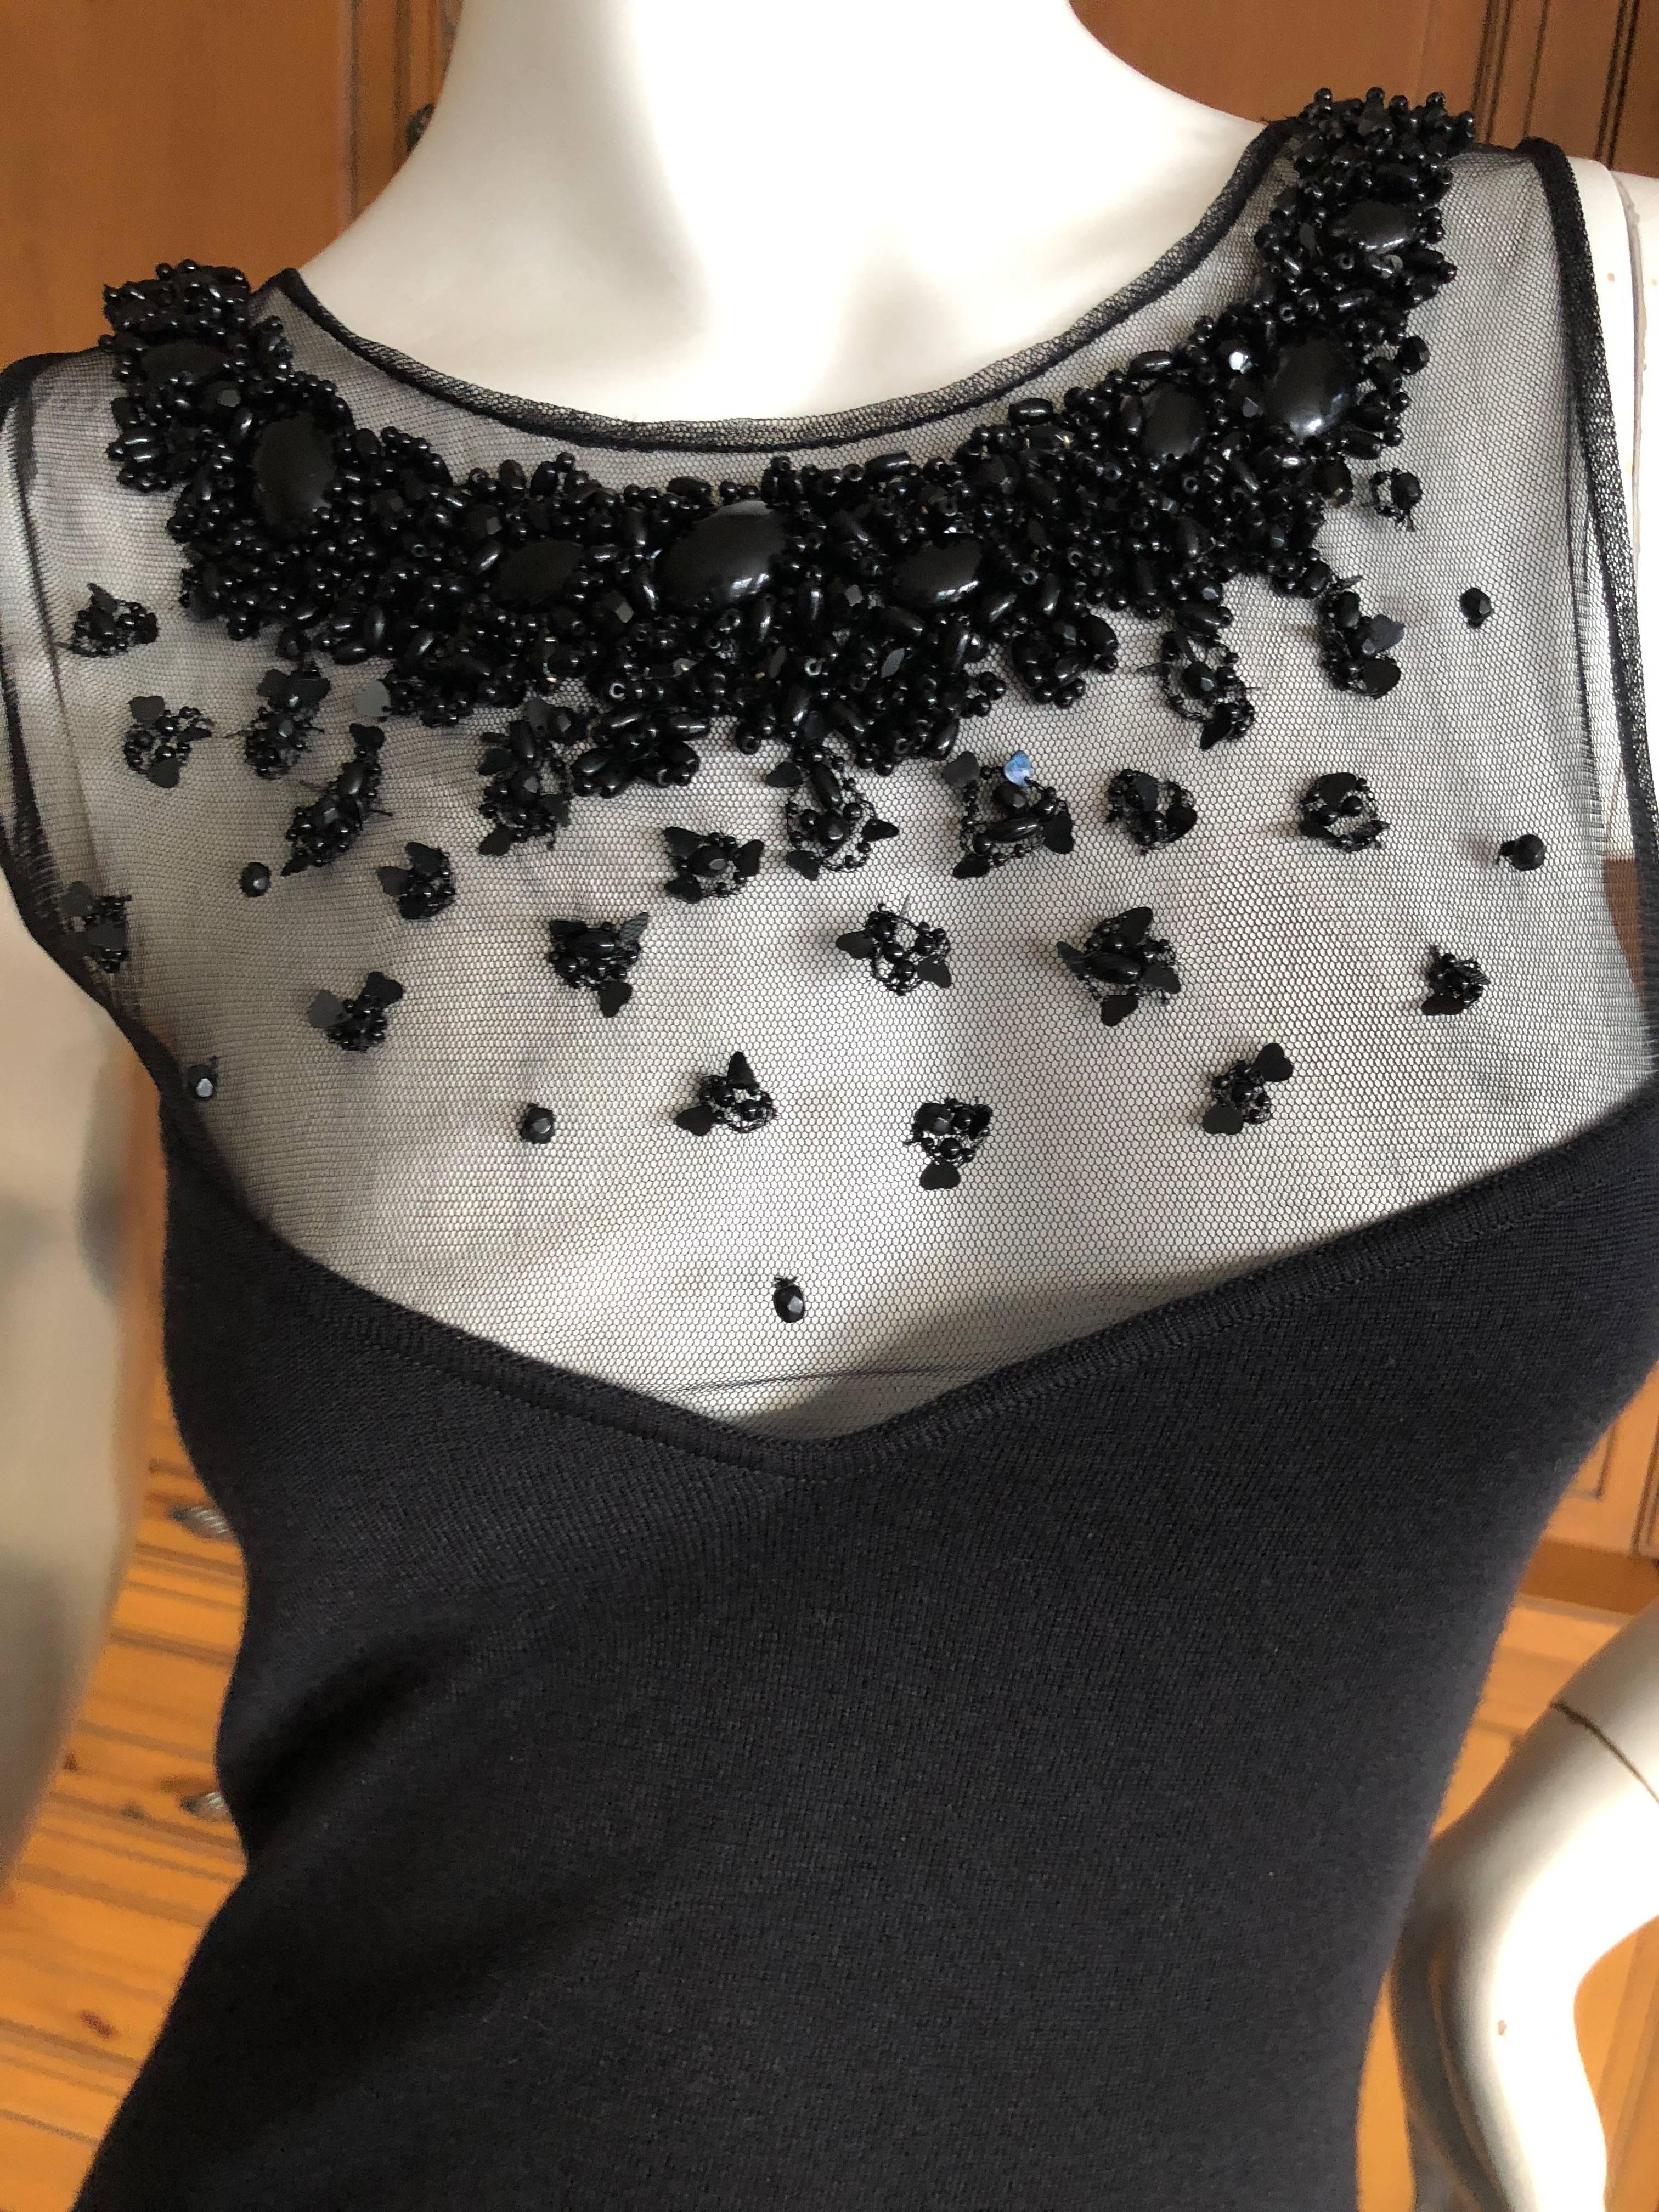 Christian Dior Classic Black Cashmere Cocktail Dress w Jeweled Collar by Lesage In Excellent Condition For Sale In Cloverdale, CA